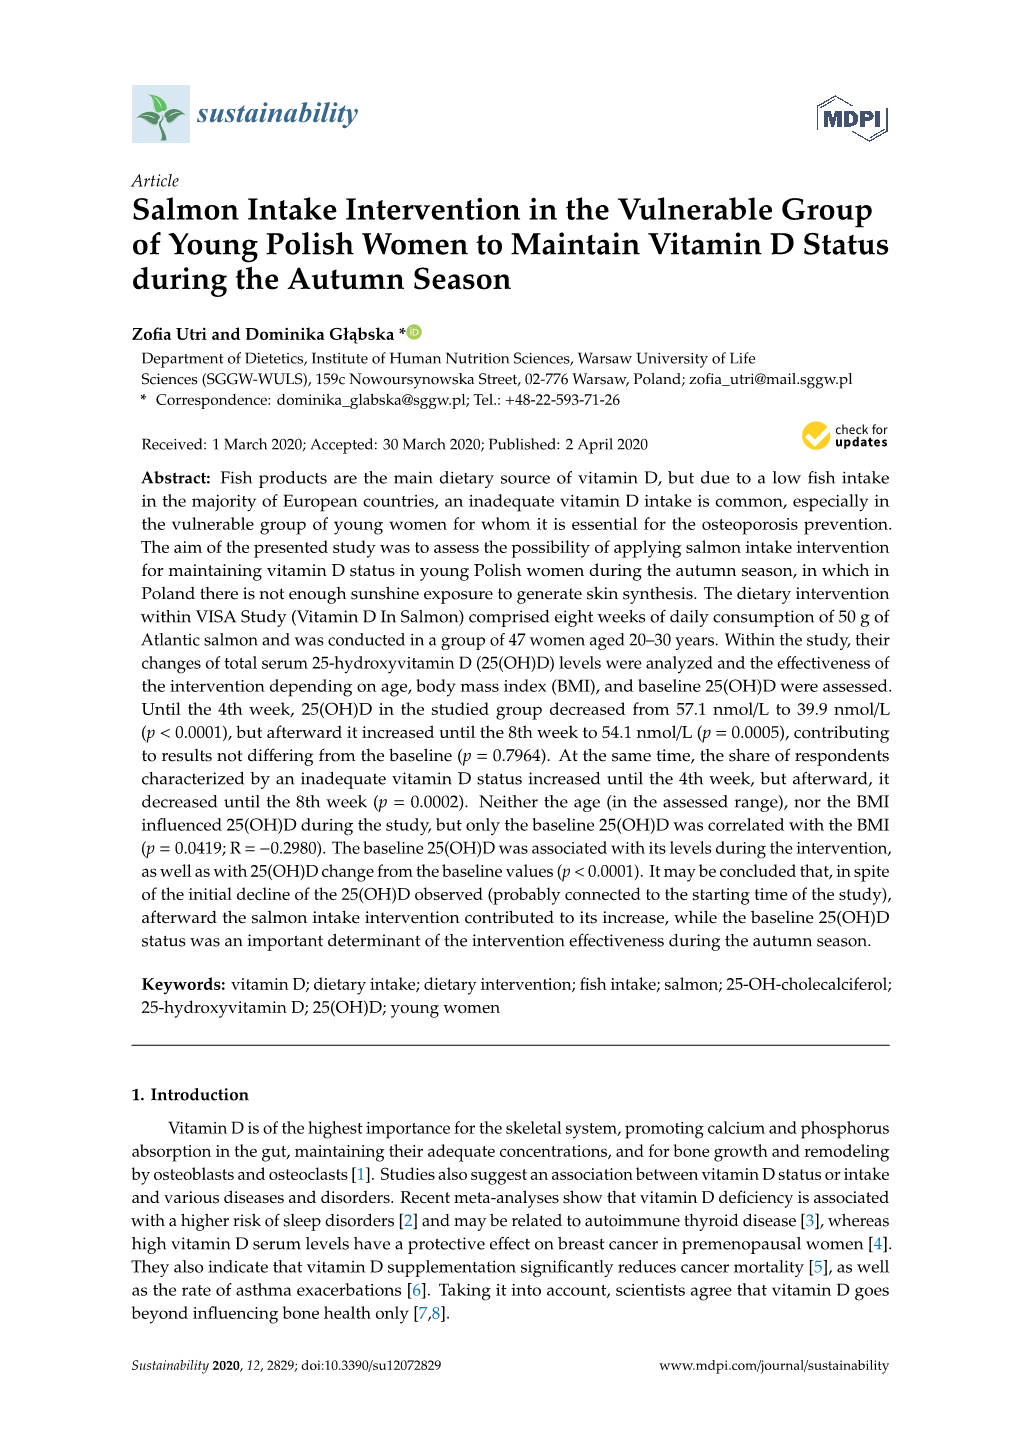 Salmon Intake Intervention in the Vulnerable Group of Young Polish Women to Maintain Vitamin D Status During the Autumn Season